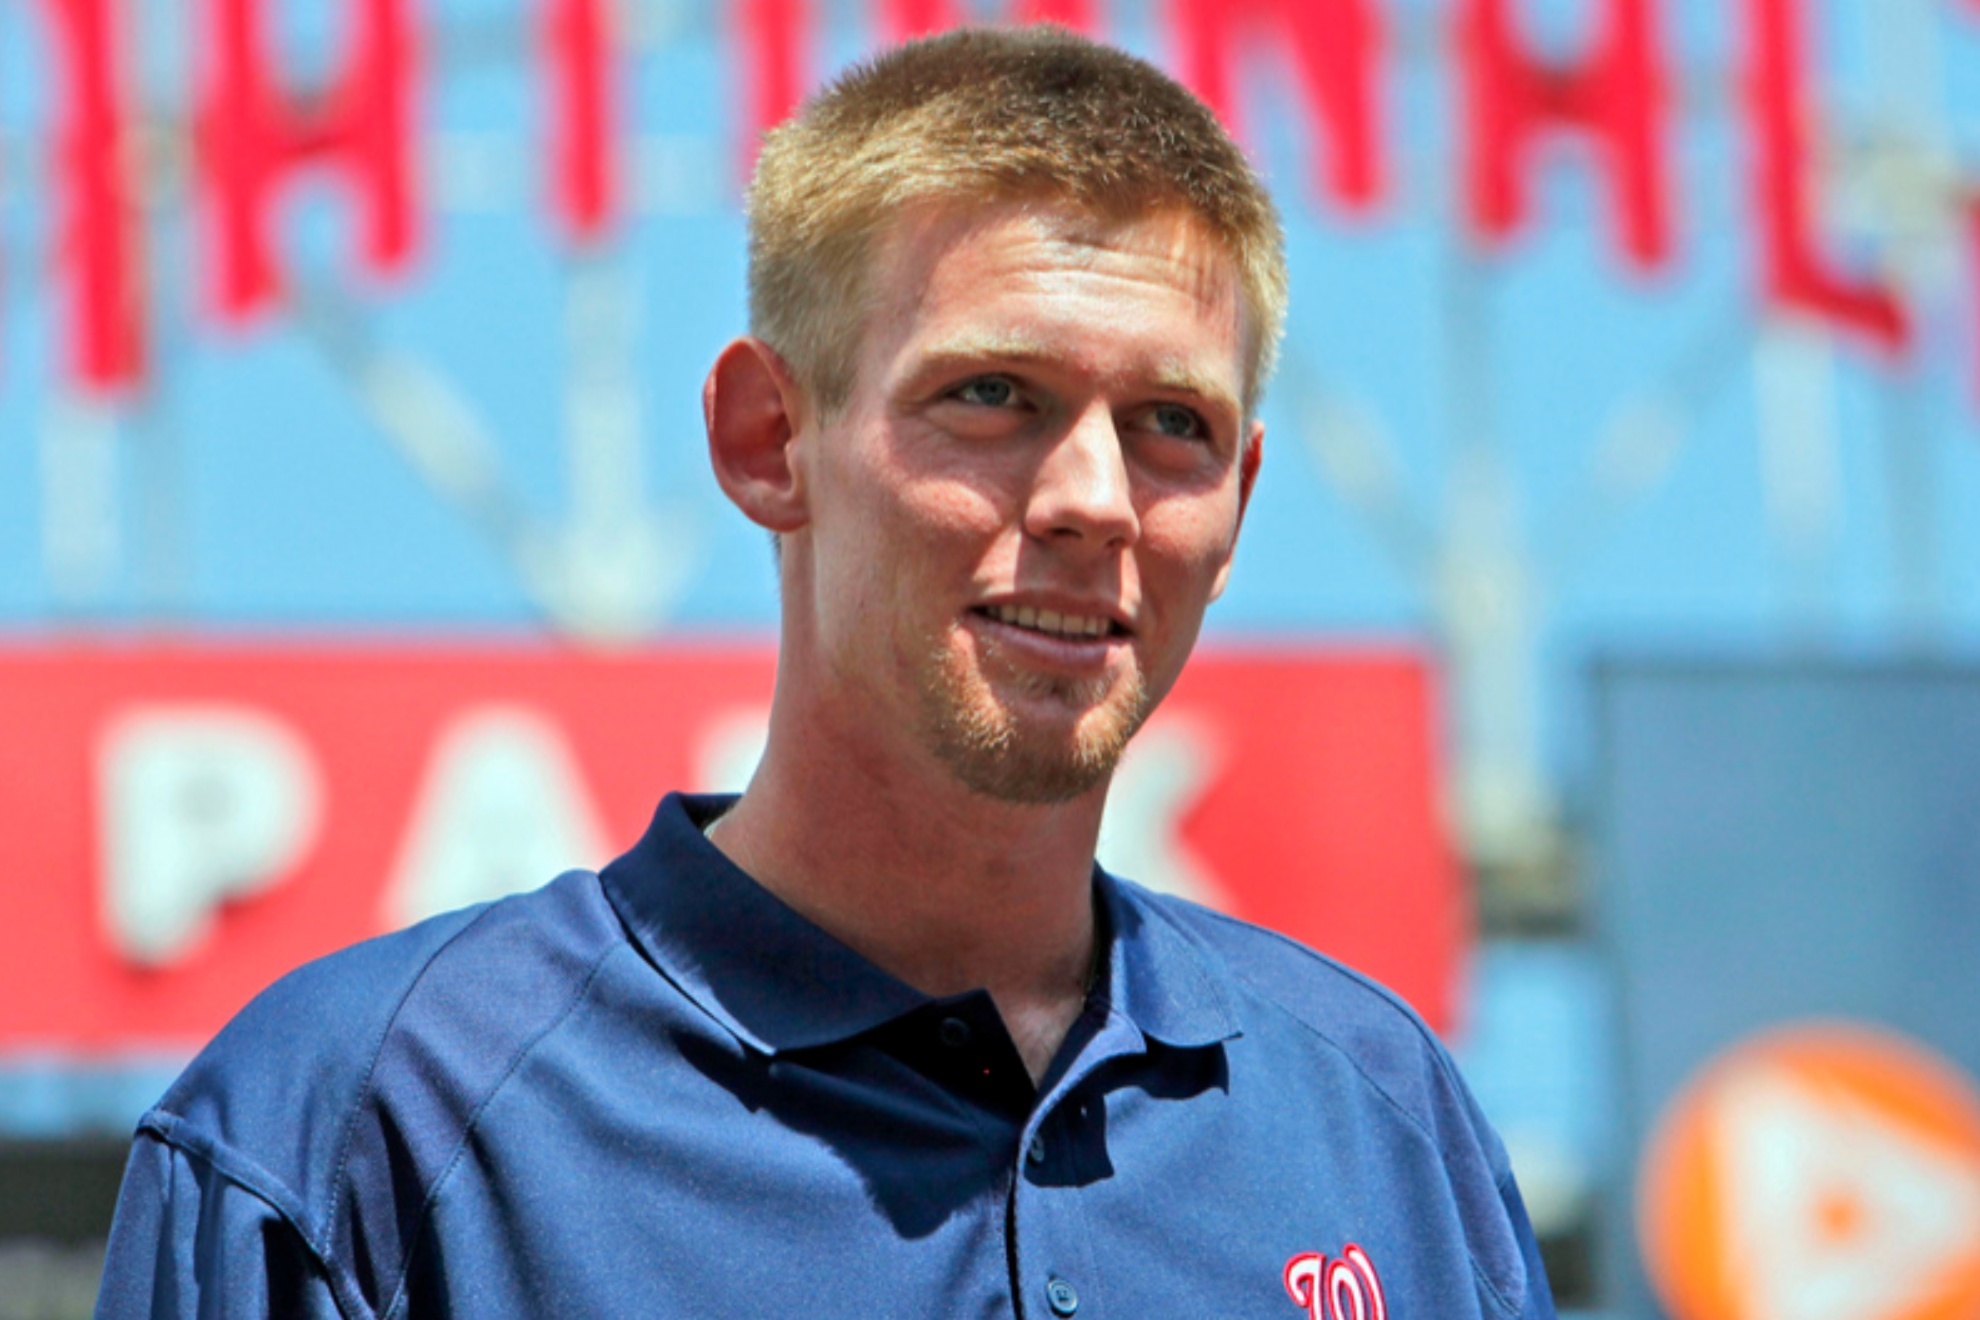 Stephen Strasburg officially retired from the MLB on Saturday